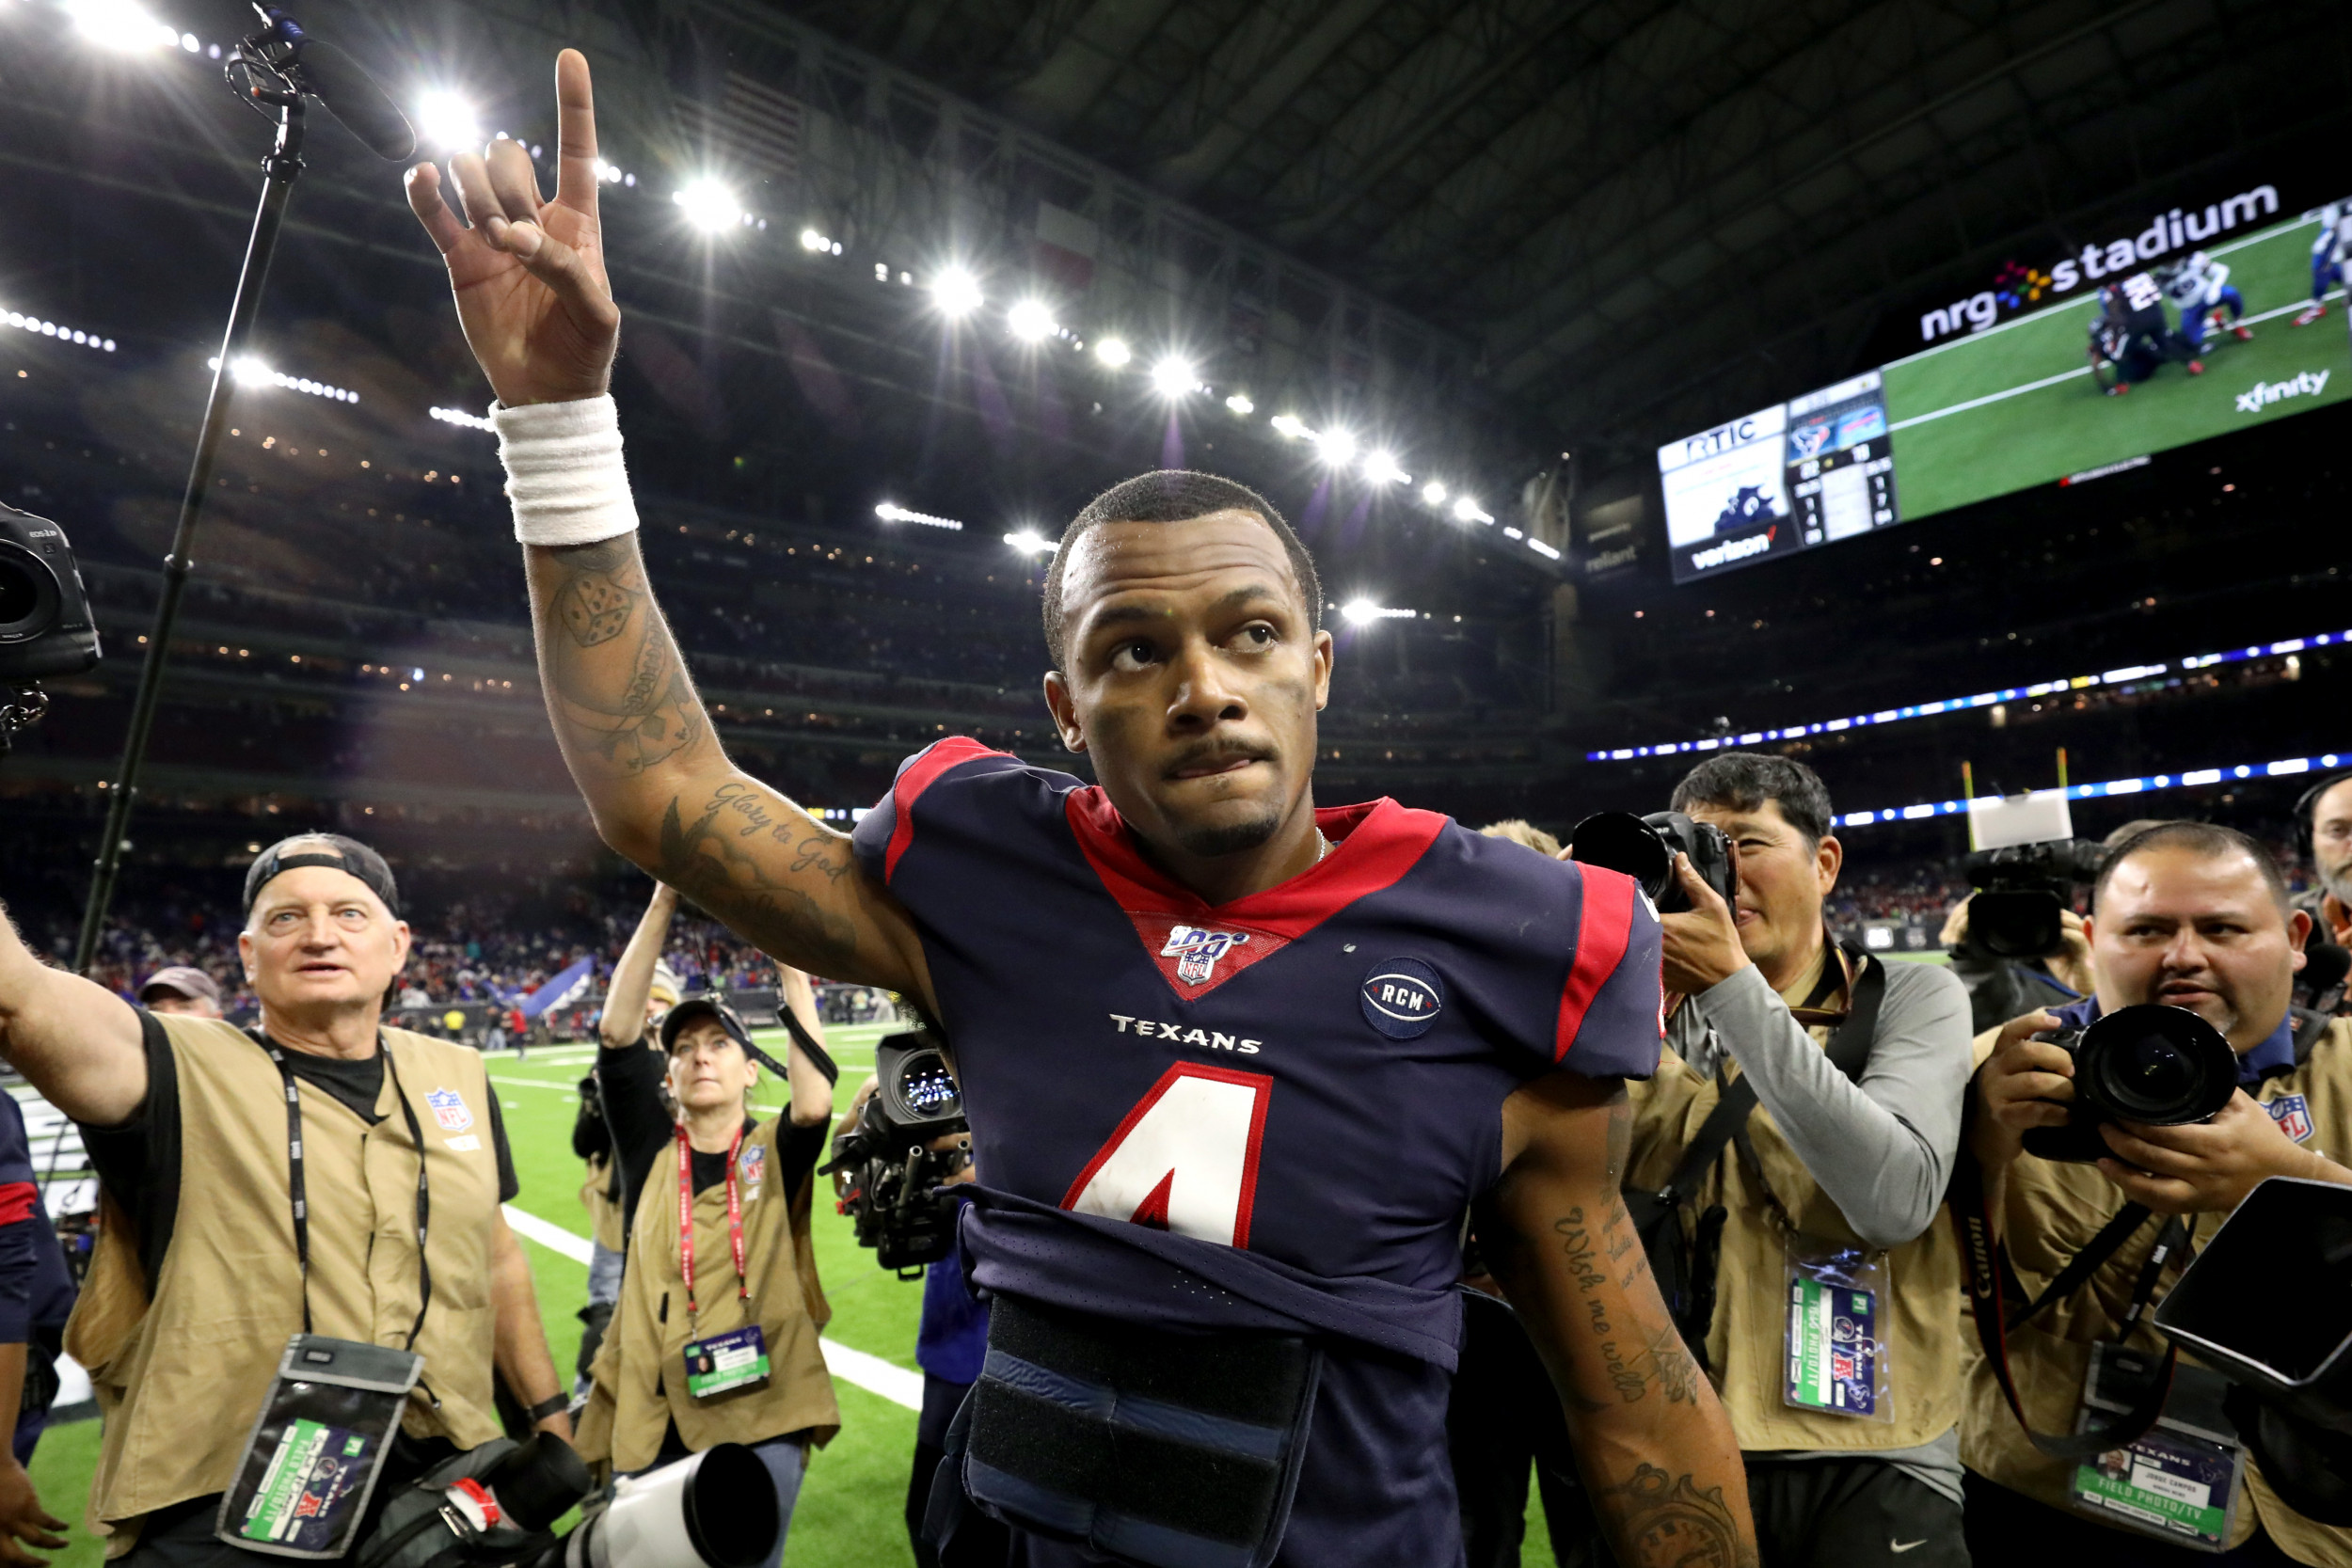 Grand jury declines to charge Deshaun Watson after 22 women